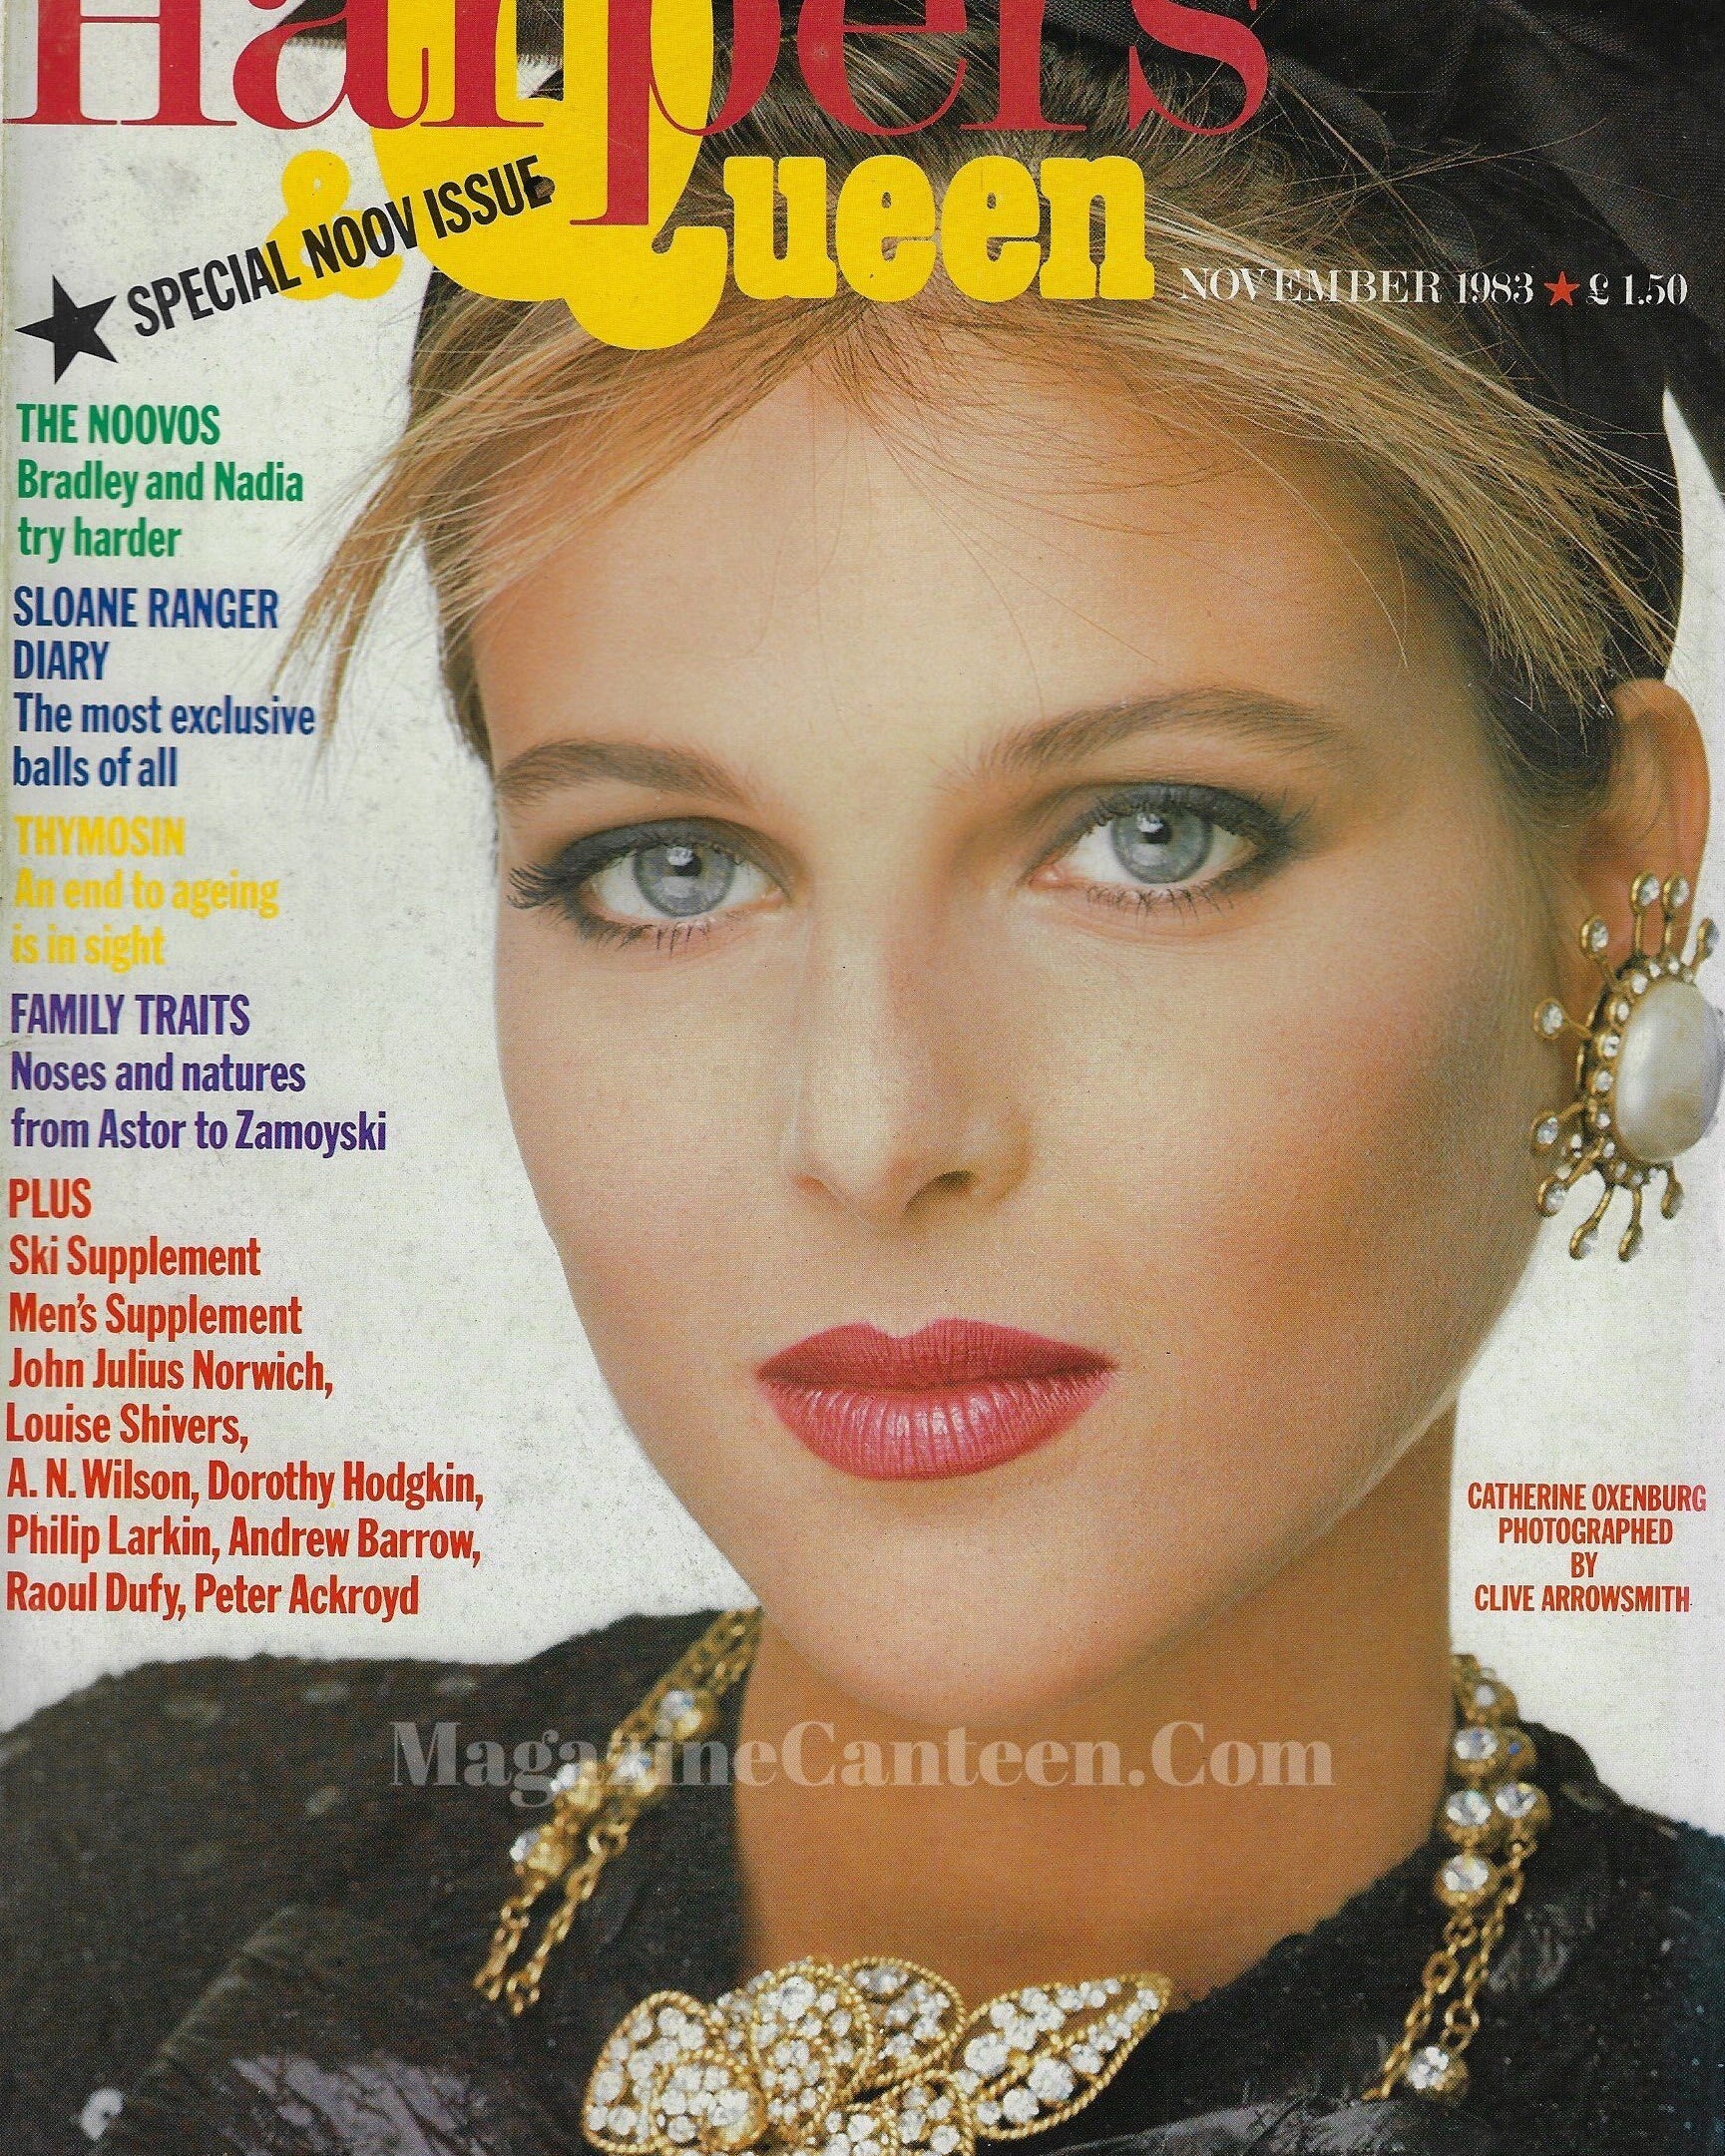 Harpers & Queen Magazine - Catherine Oxenberg